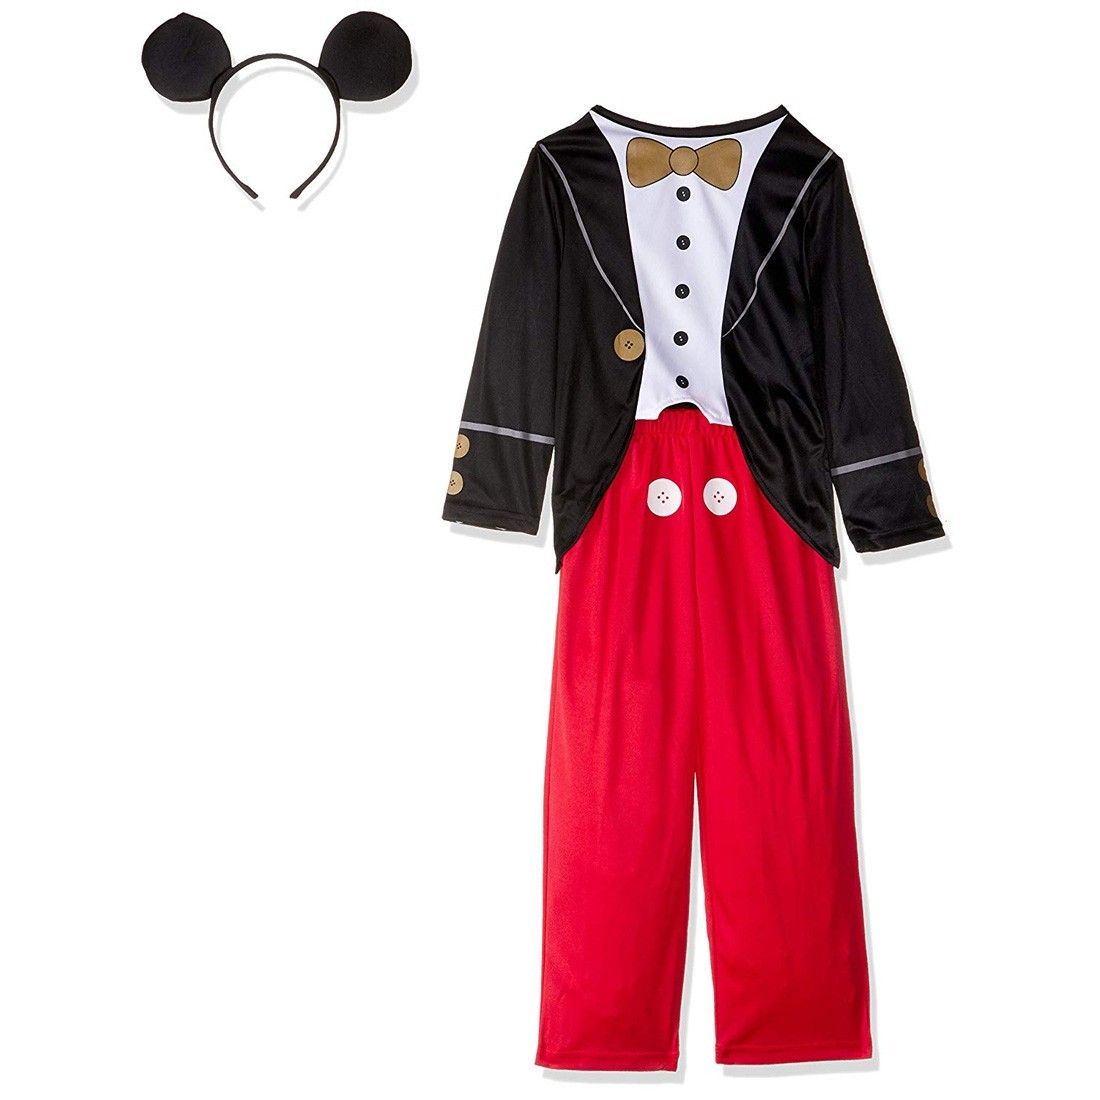 Shop Mickey Mouse Costume Boy Toddler Rubies Delivered To Your